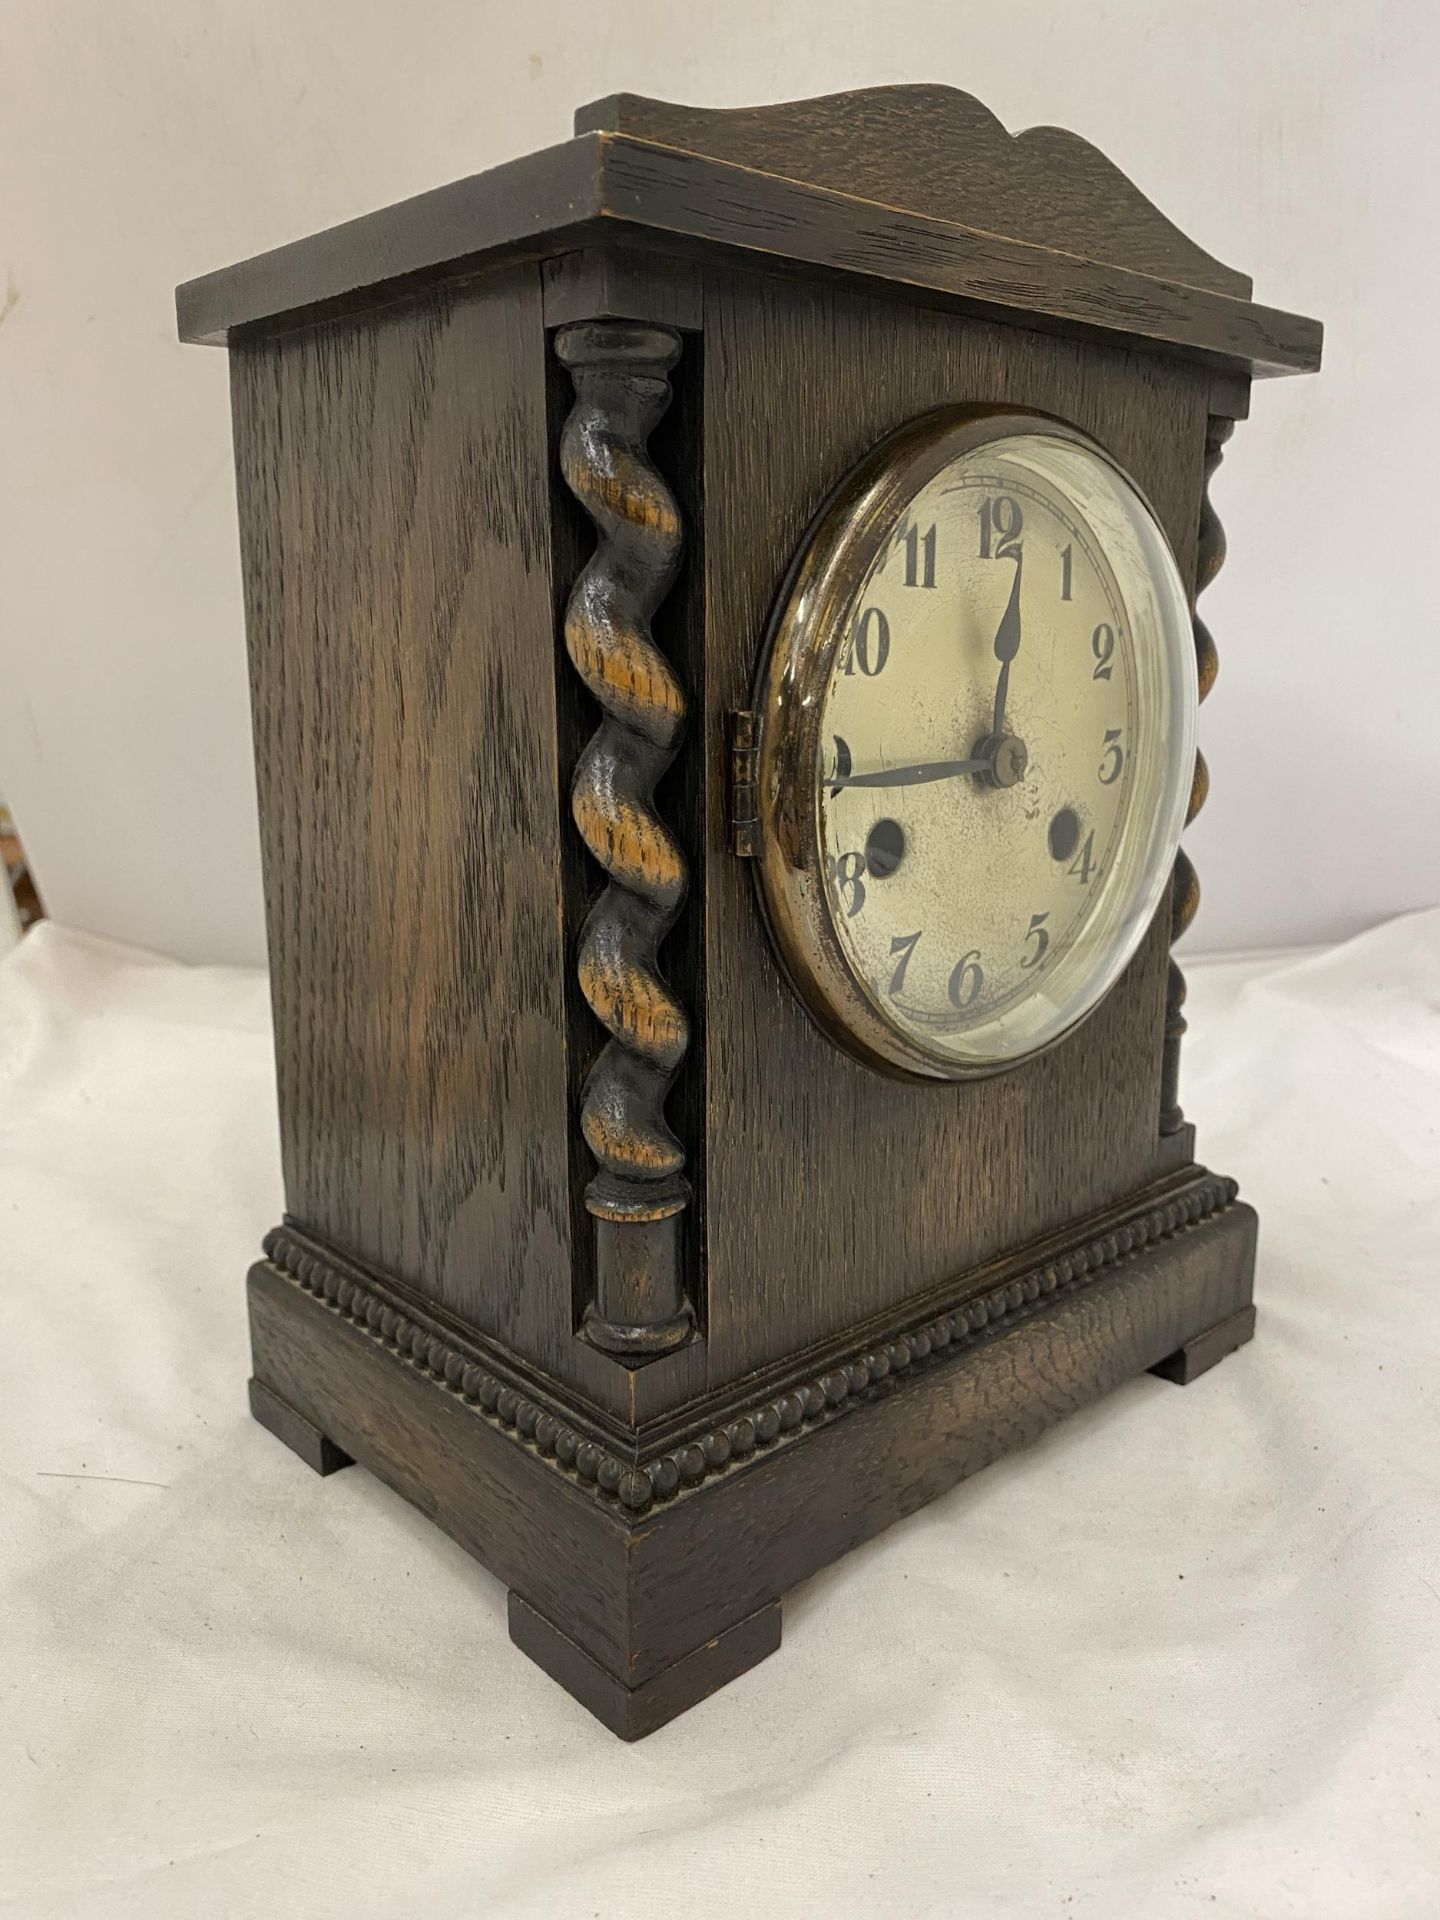 A WOODEN MANTLE CLOCK WITH BARLEY TWIST DESIGN - Image 3 of 7